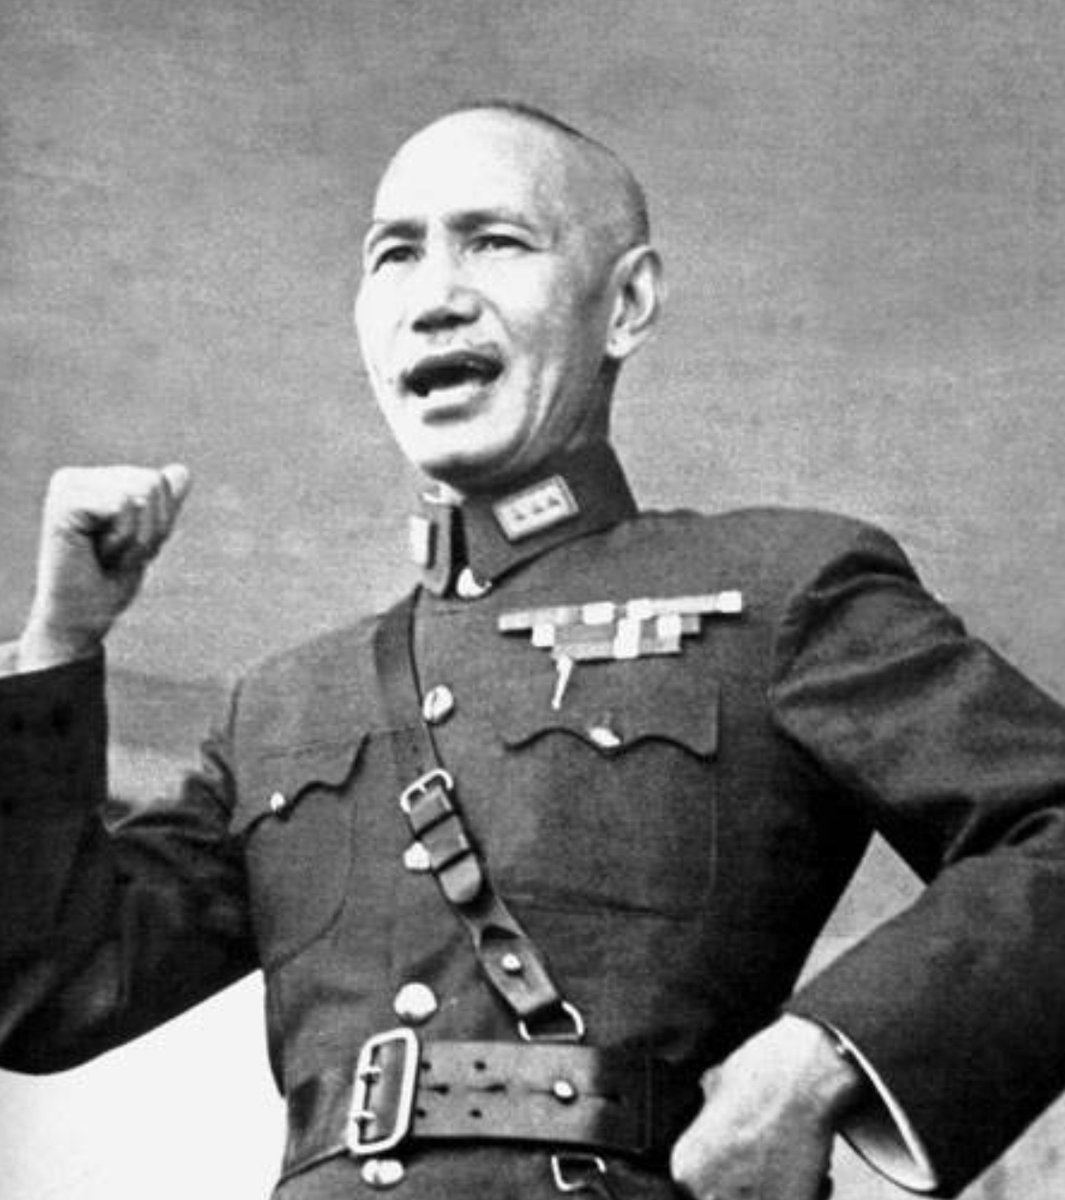 26) Chiang Kai-shek, one of greatest heroes of 20th century, 1st President of Republic of China under 1947 Constitution. A devout Methodist Christian, whose unwavering belief was that China’s social ills were to be addressed through personal discipline and moral transformation.